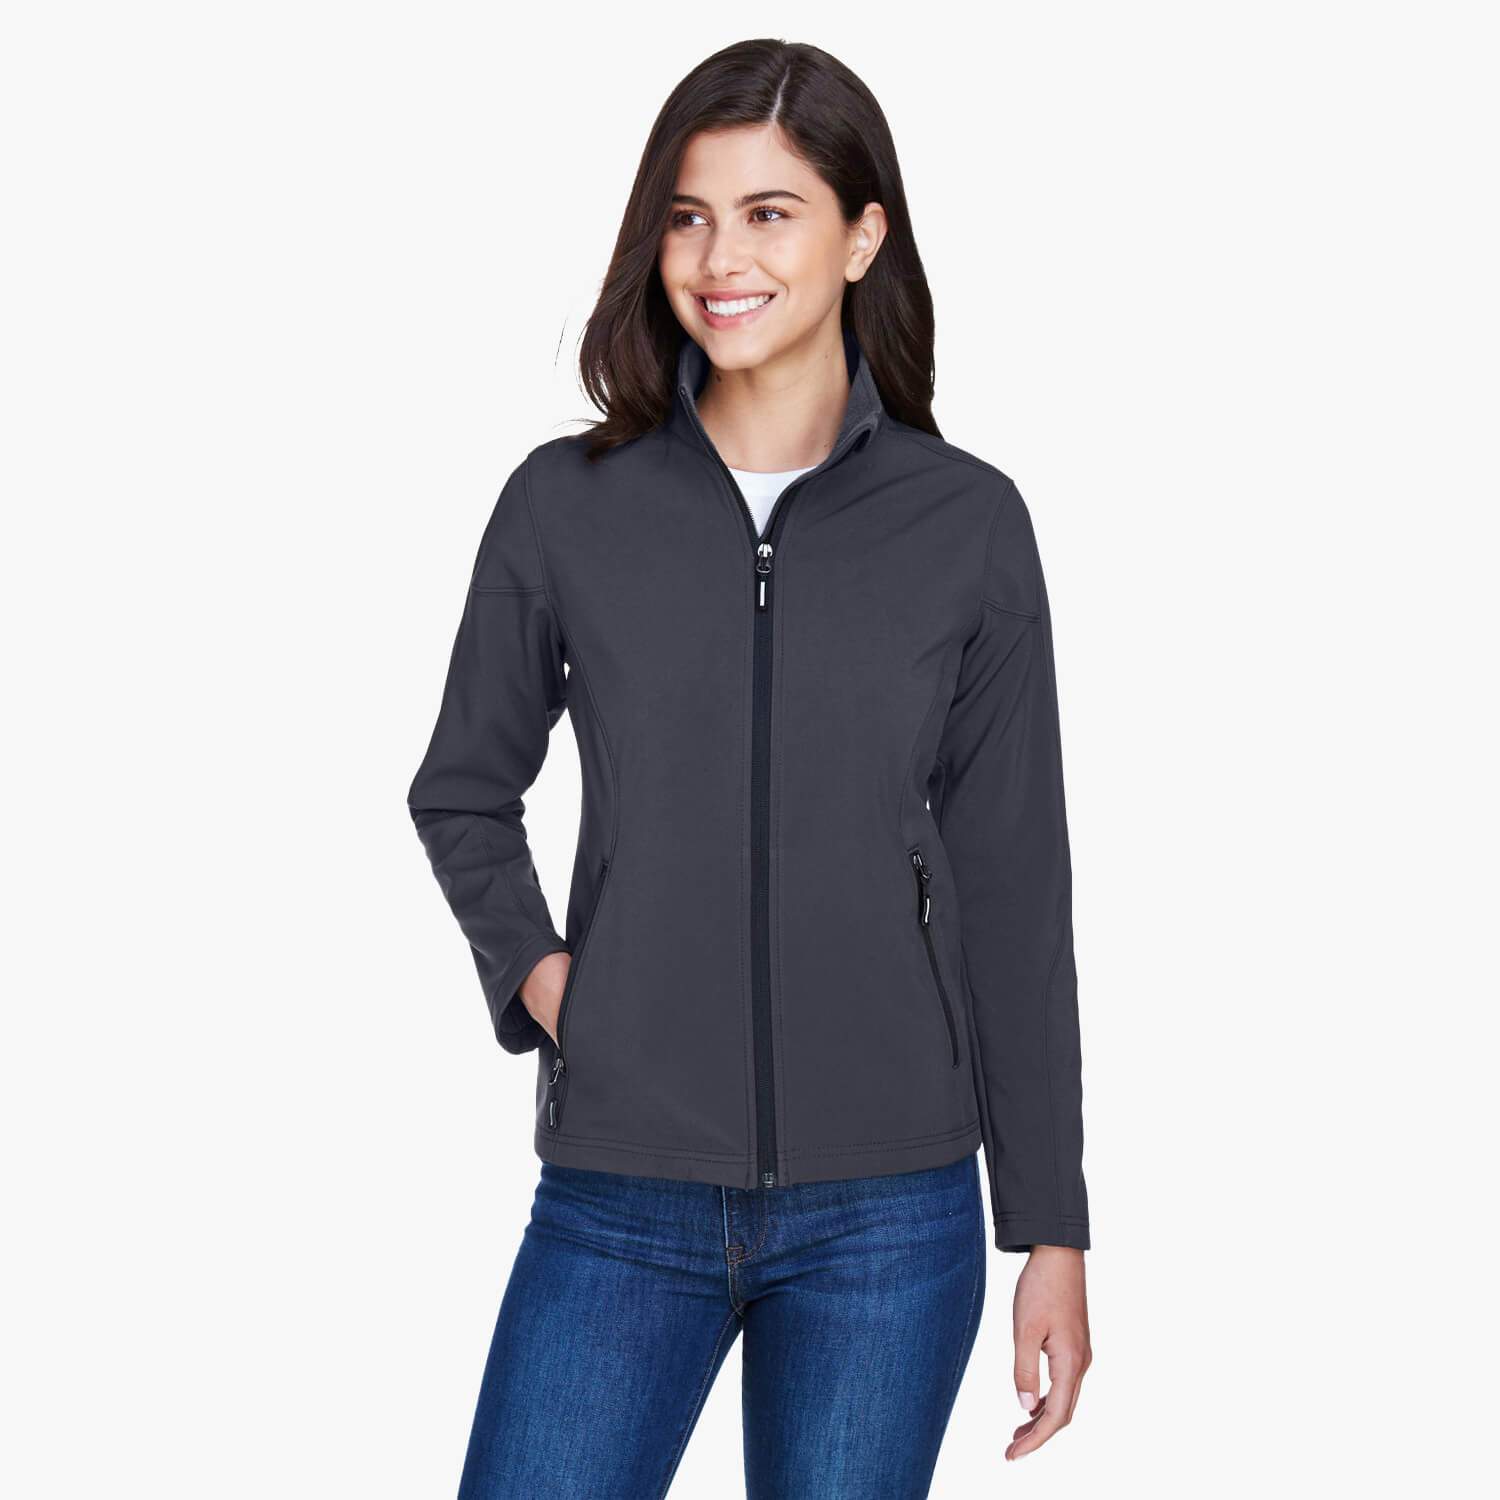 Core 365 Ladies' Cruise Two-layer Fleece Bonded Soft Shell Jacket